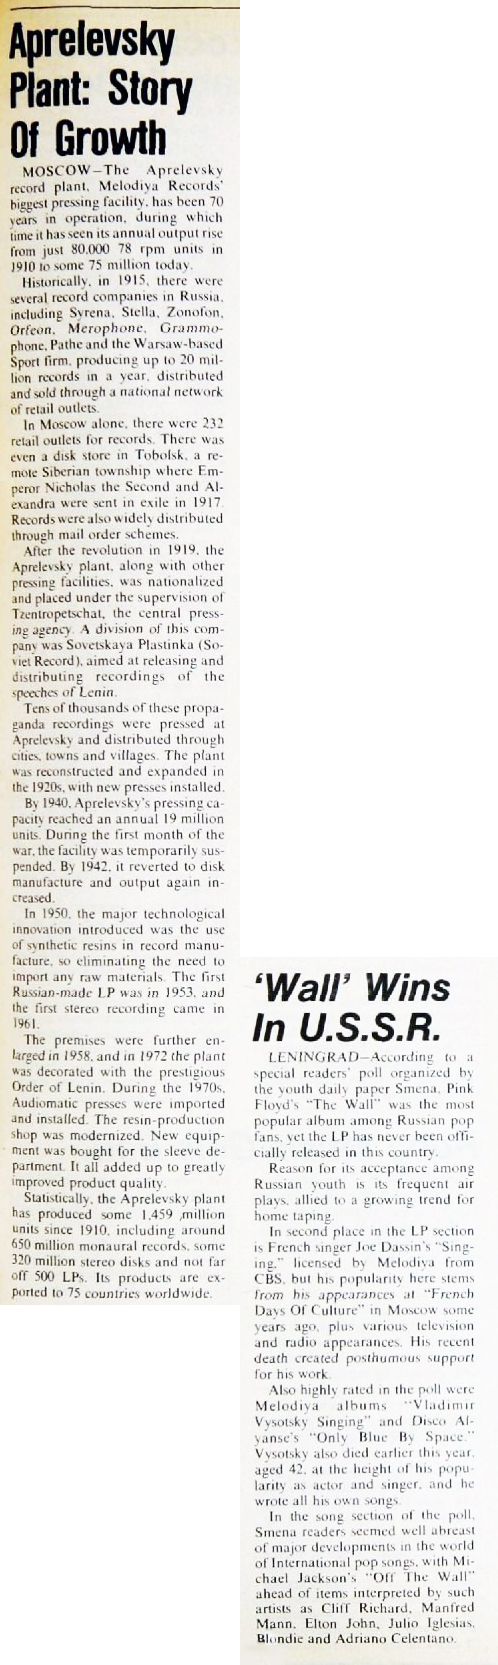 Aprelevsky Plant: Story Of Grouth.   "Wall" Wins In U.S.S.R.